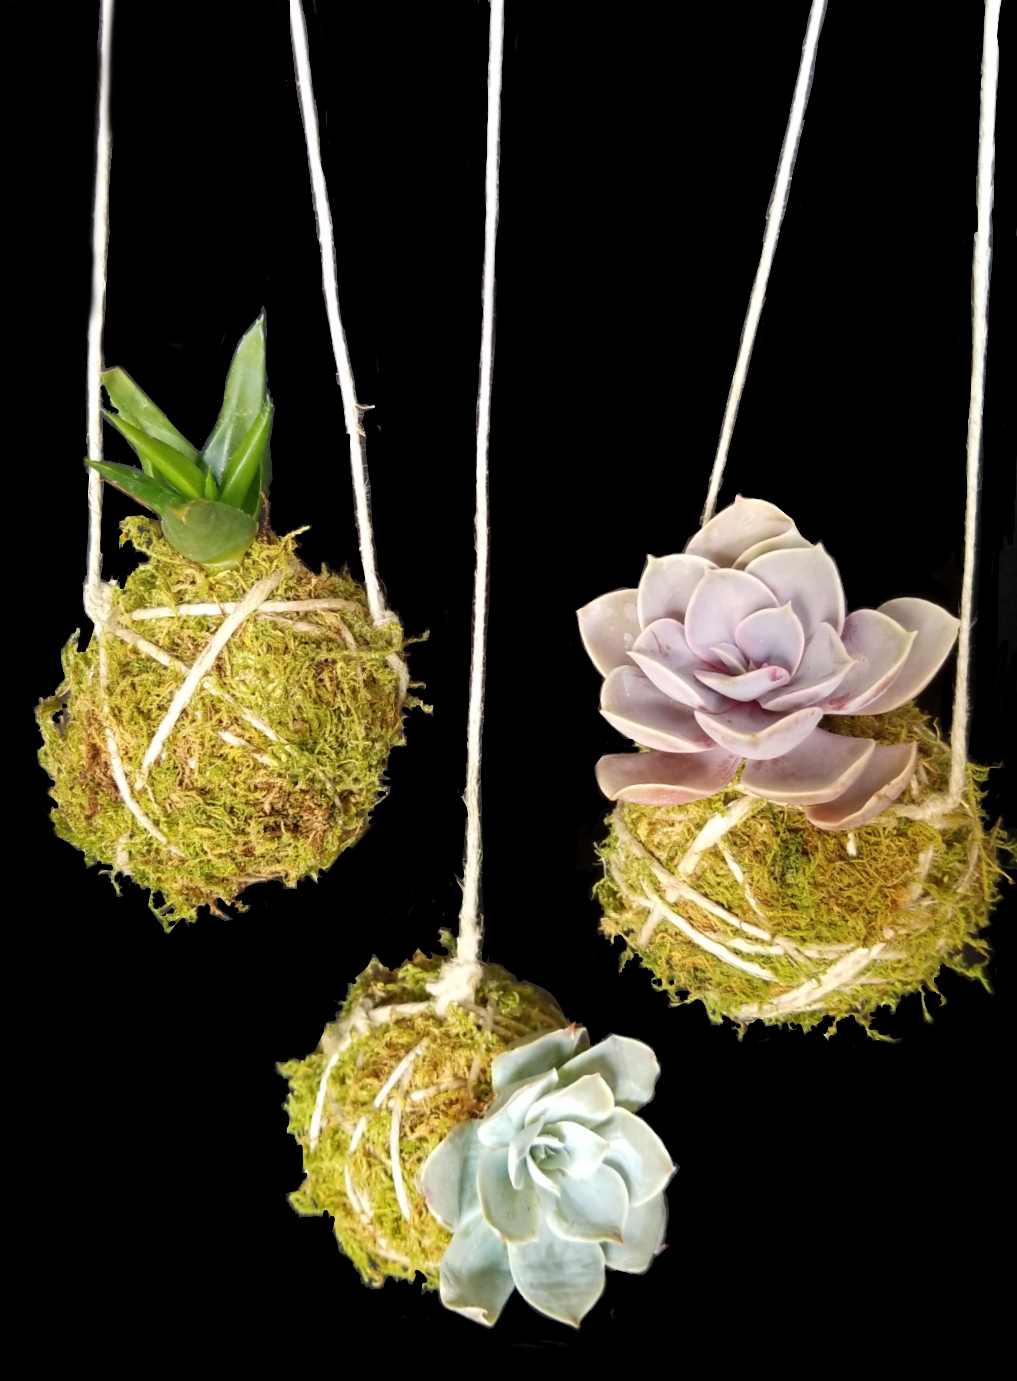 A Moss and Twine Hanging Succulents plant nite project by Yaymaker